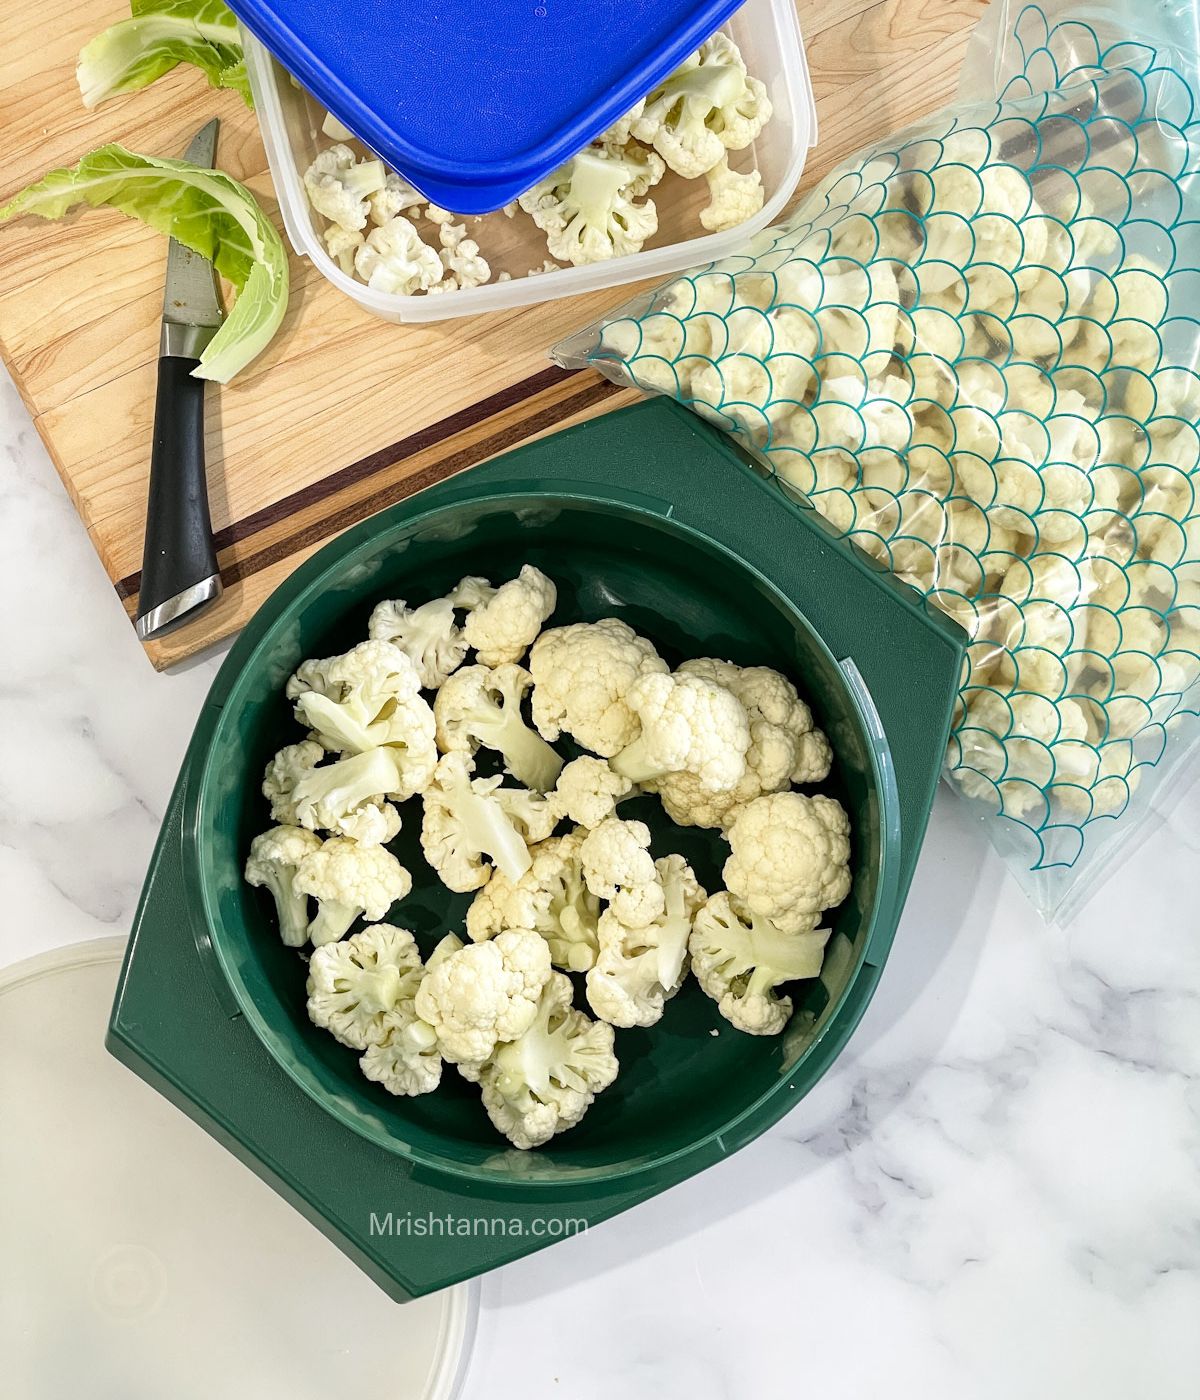 A Tupperware box and zip lock bags are with cauliflower florets on the table.